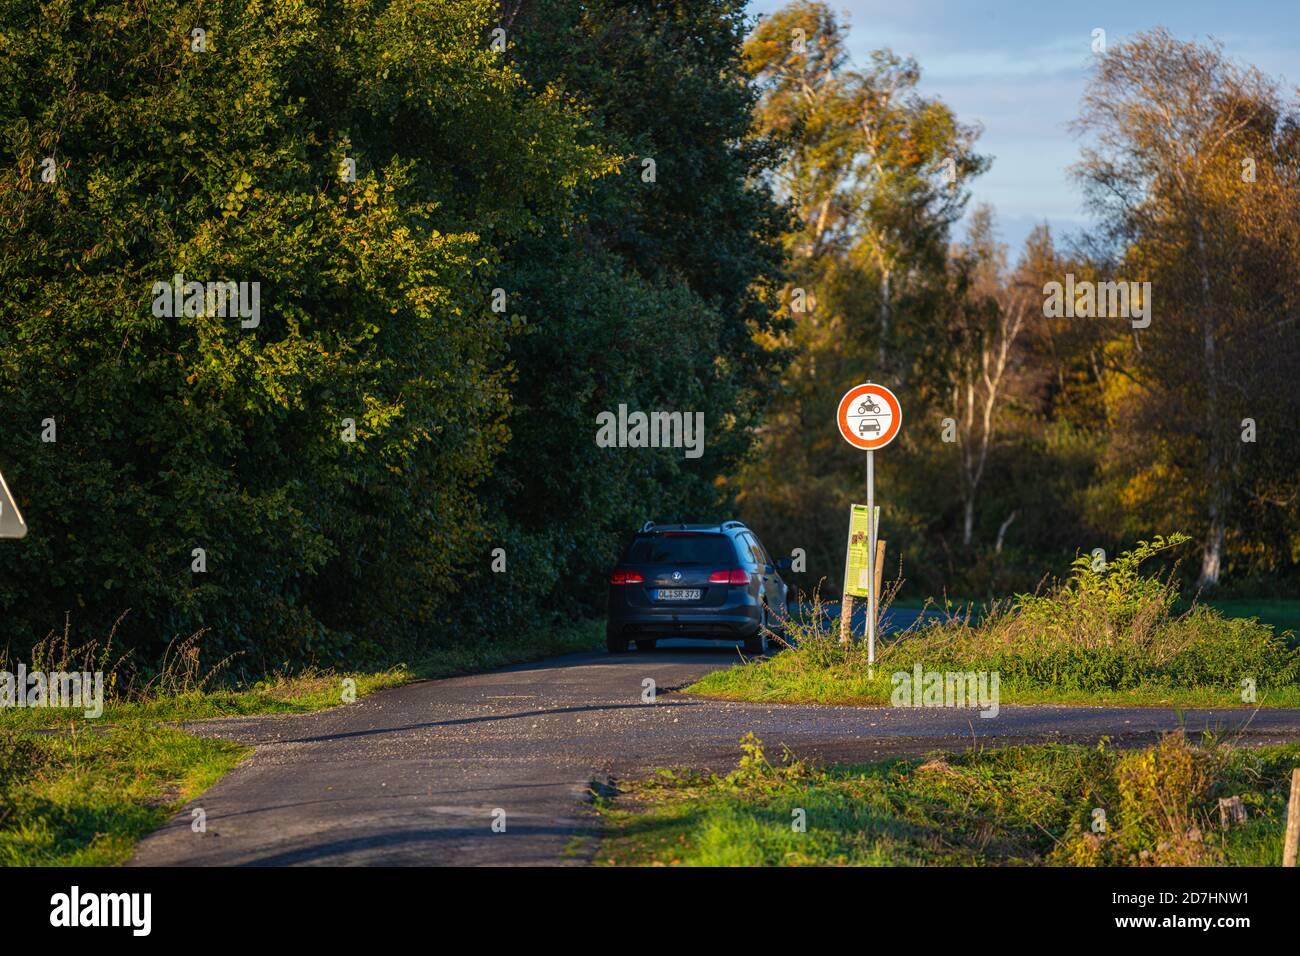 October 21, 2020  Hude Germany: A car drives into a zone in the country where no cars or motorcycles are permitted Stock Photo